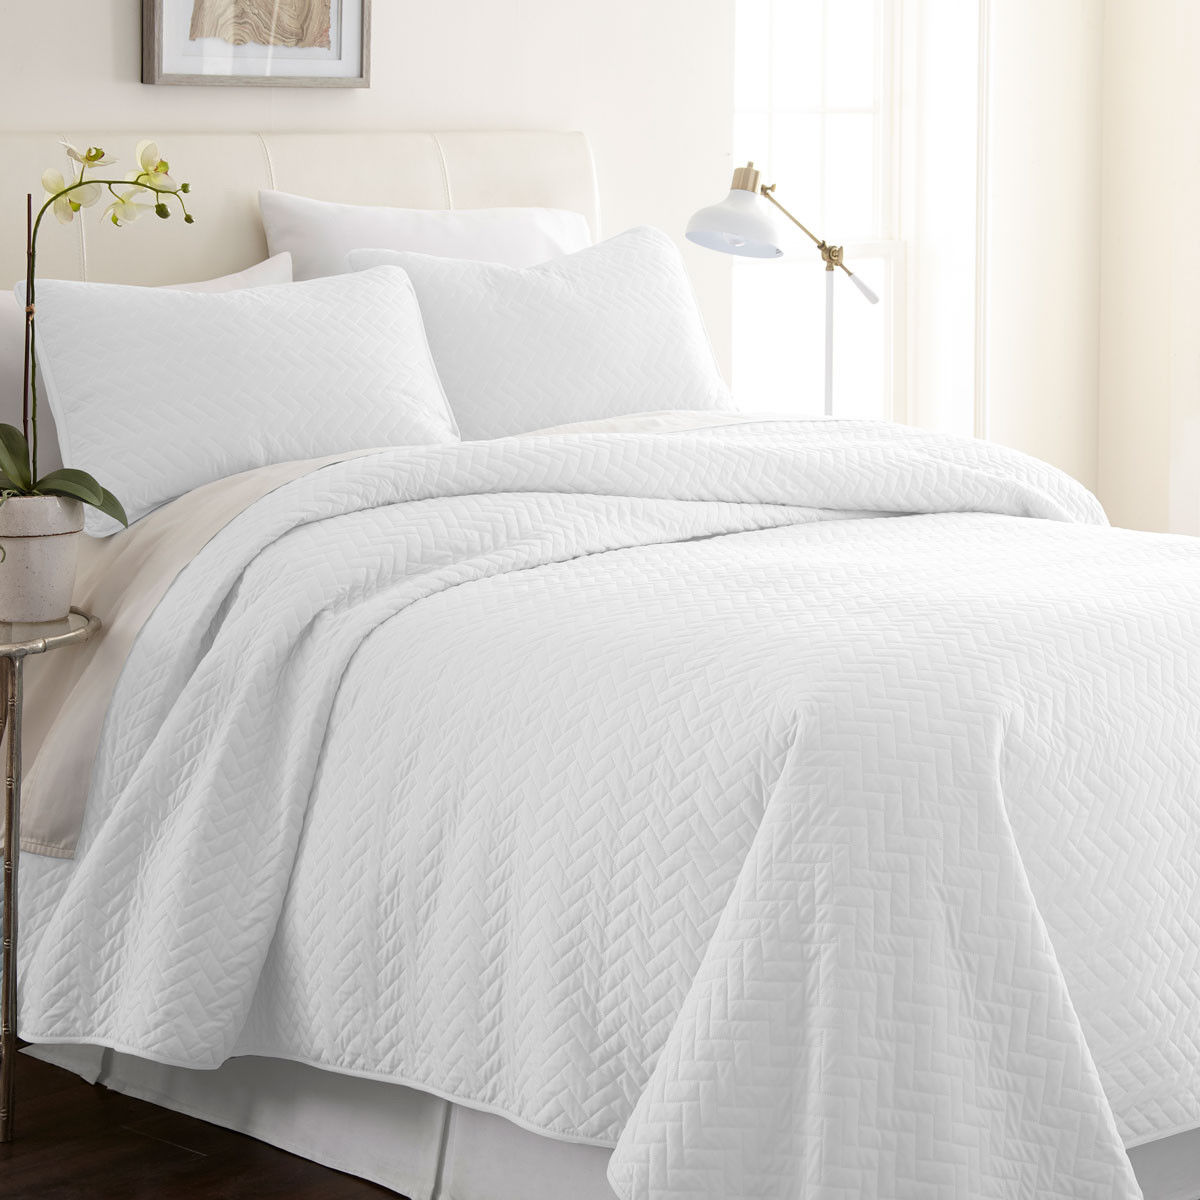 What's in the 3-Piece Herring Quilted Coverlet Set for each bed size?